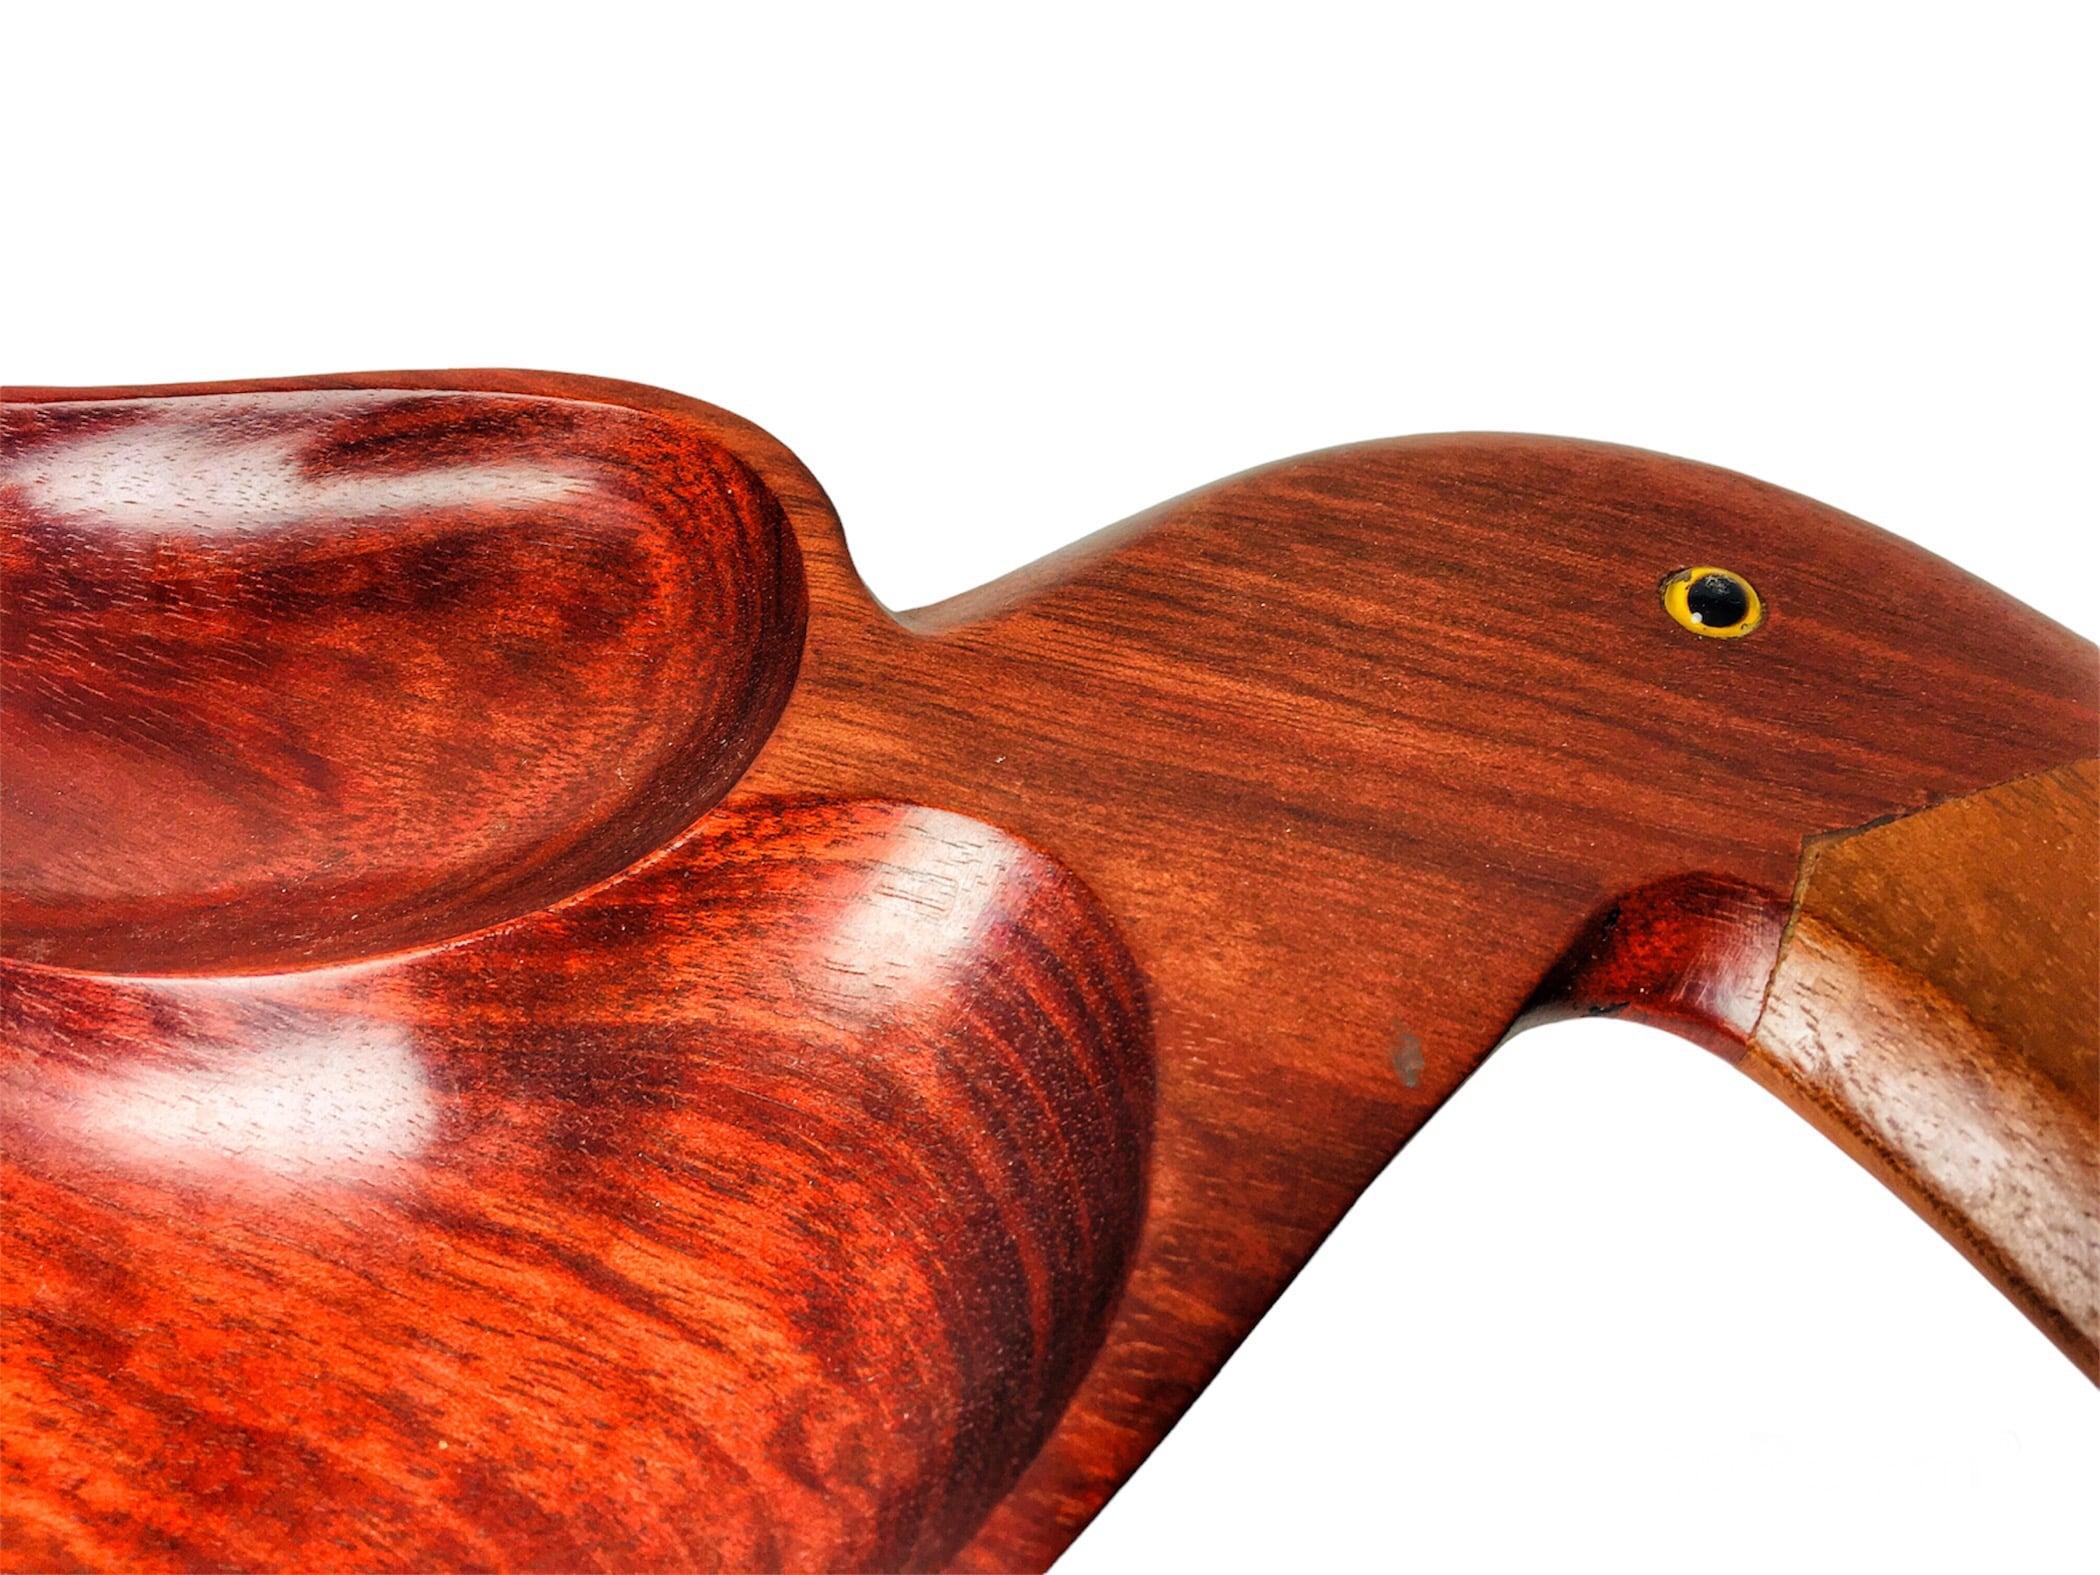 Vintage Toucan Shaped Teak Wood Serving Tray, Snack Bowl In Good Condition For Sale In Budapest, HU